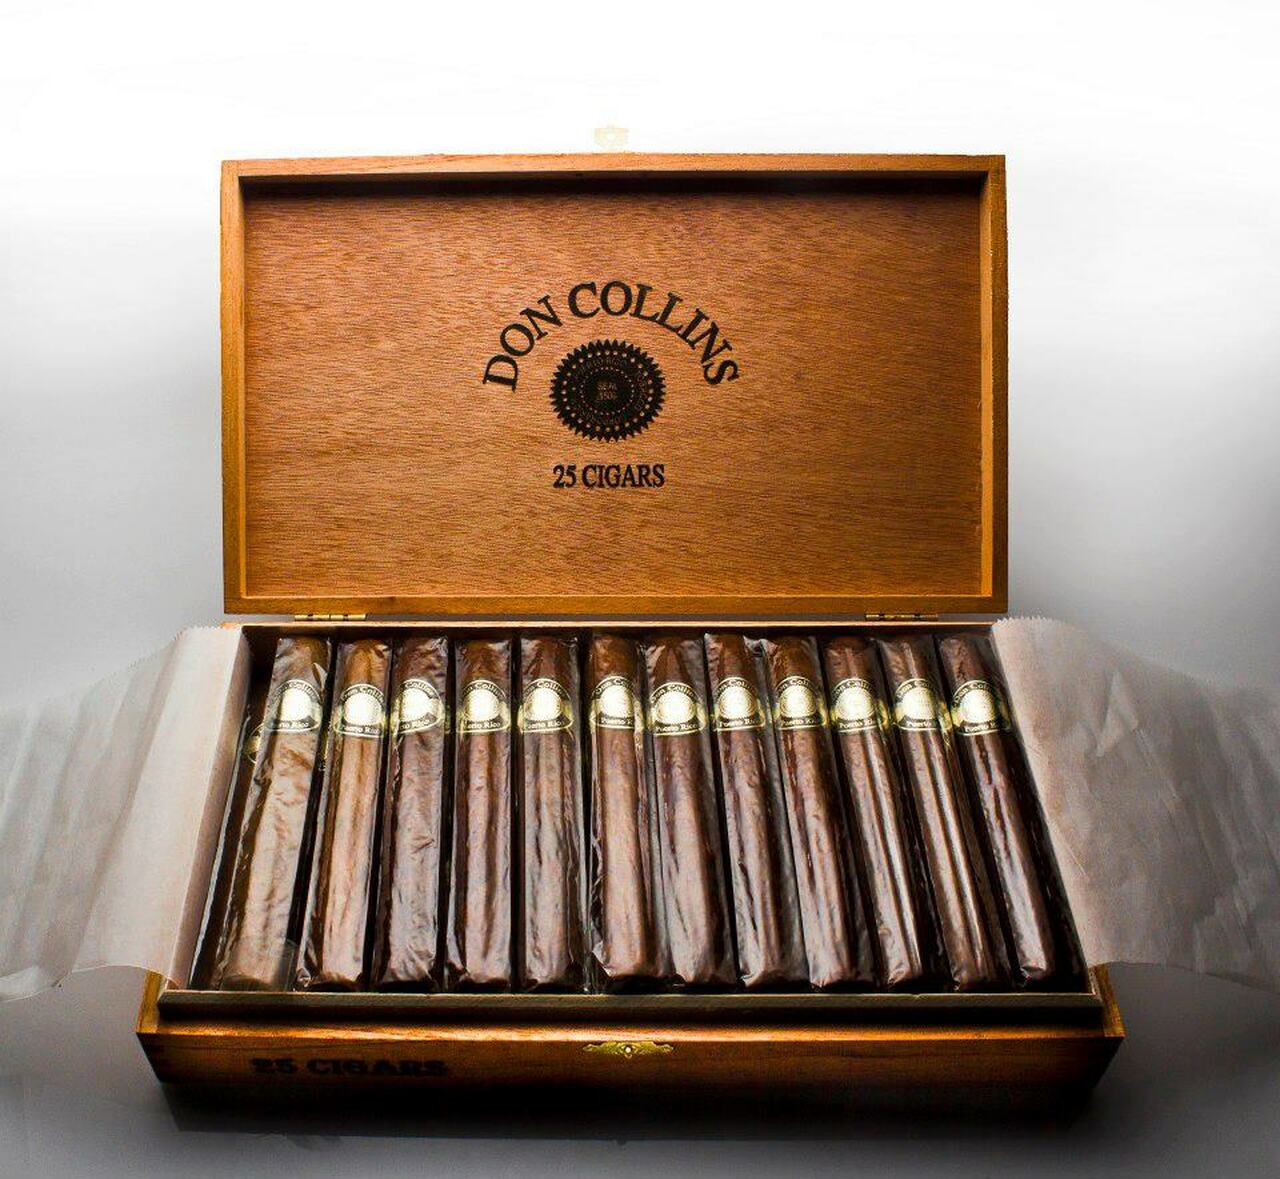 Don collins cigars